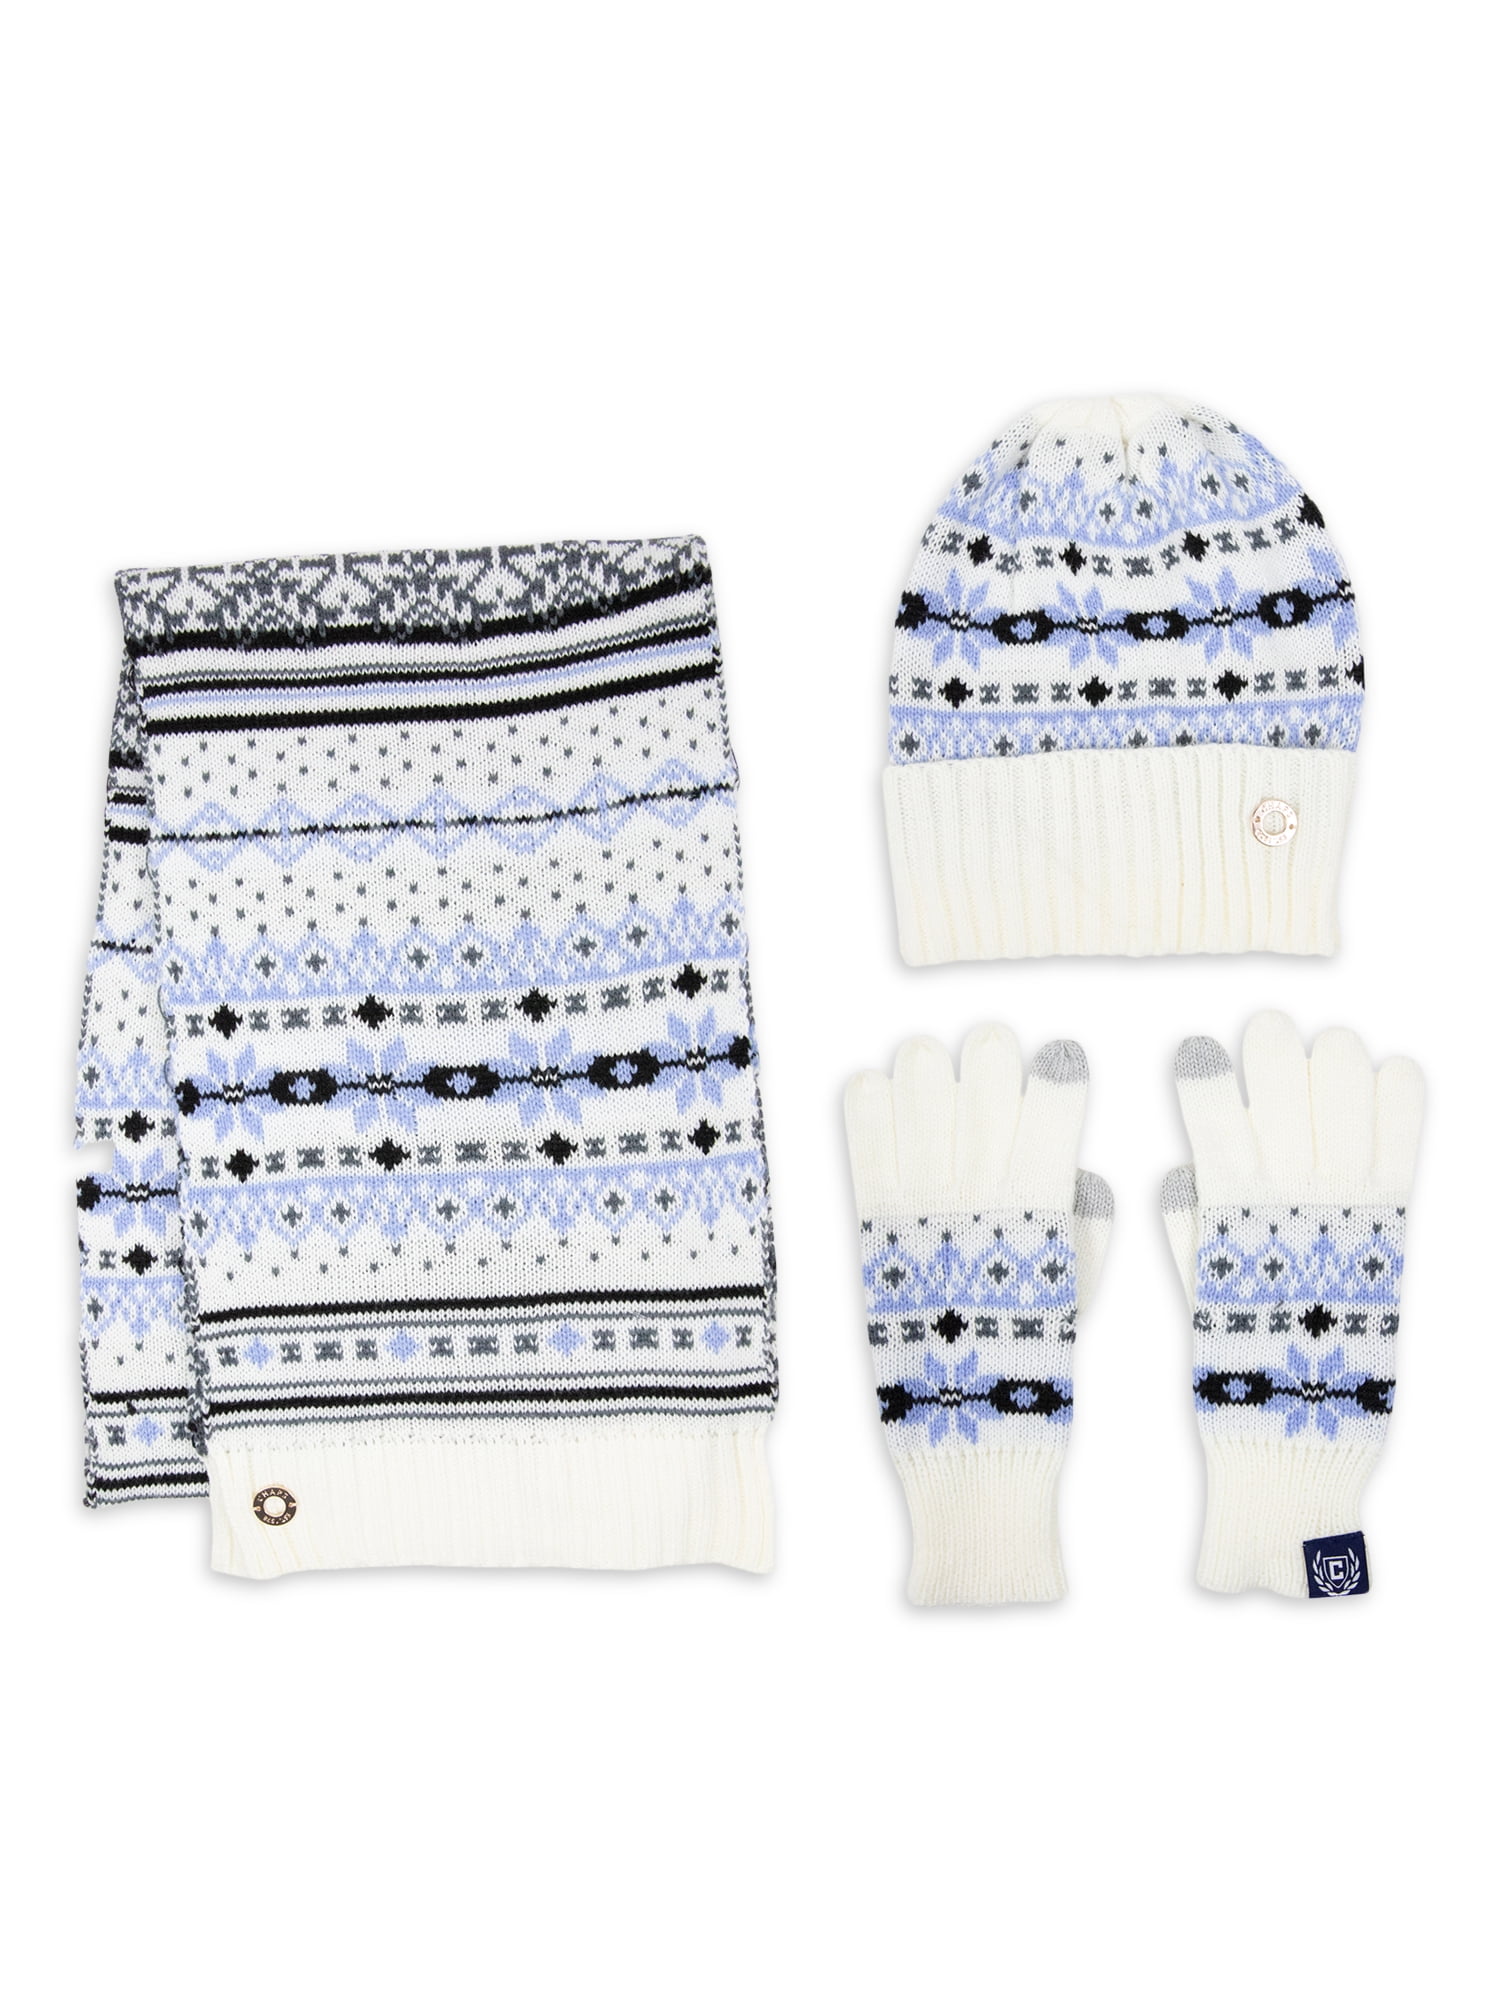 Chaps Brand Women\'s Fairisle Knit Beanie Hat Adult 3 Glove Set, Style and Piece Scarf